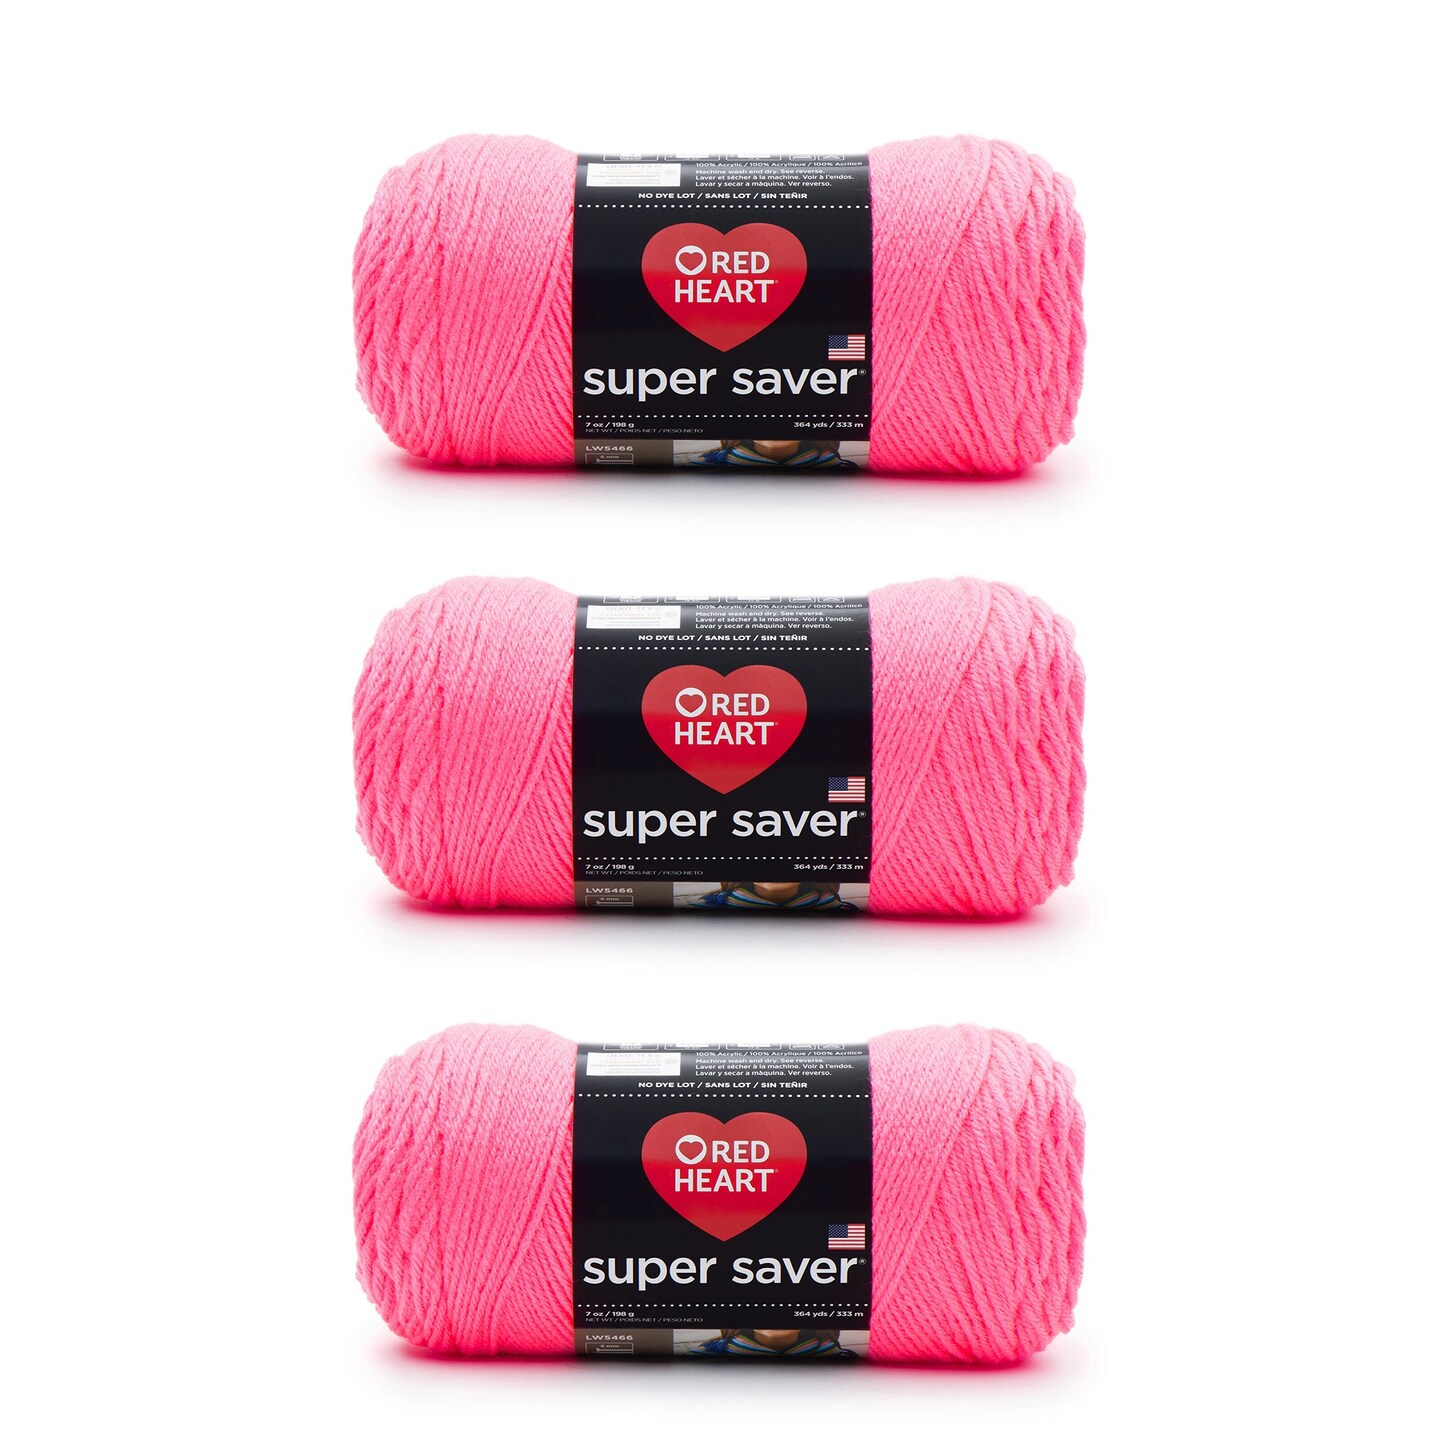  Pllieay 2x50g Packs Hot Pink and Red Yarn for Crocheting and  Knitting, Yarn Cotton Yarn for Beginners Knitting Yarn with Easy-to-See  Stitches - Worsted Medium #4 Yarn - Cotton-Nylon Blend